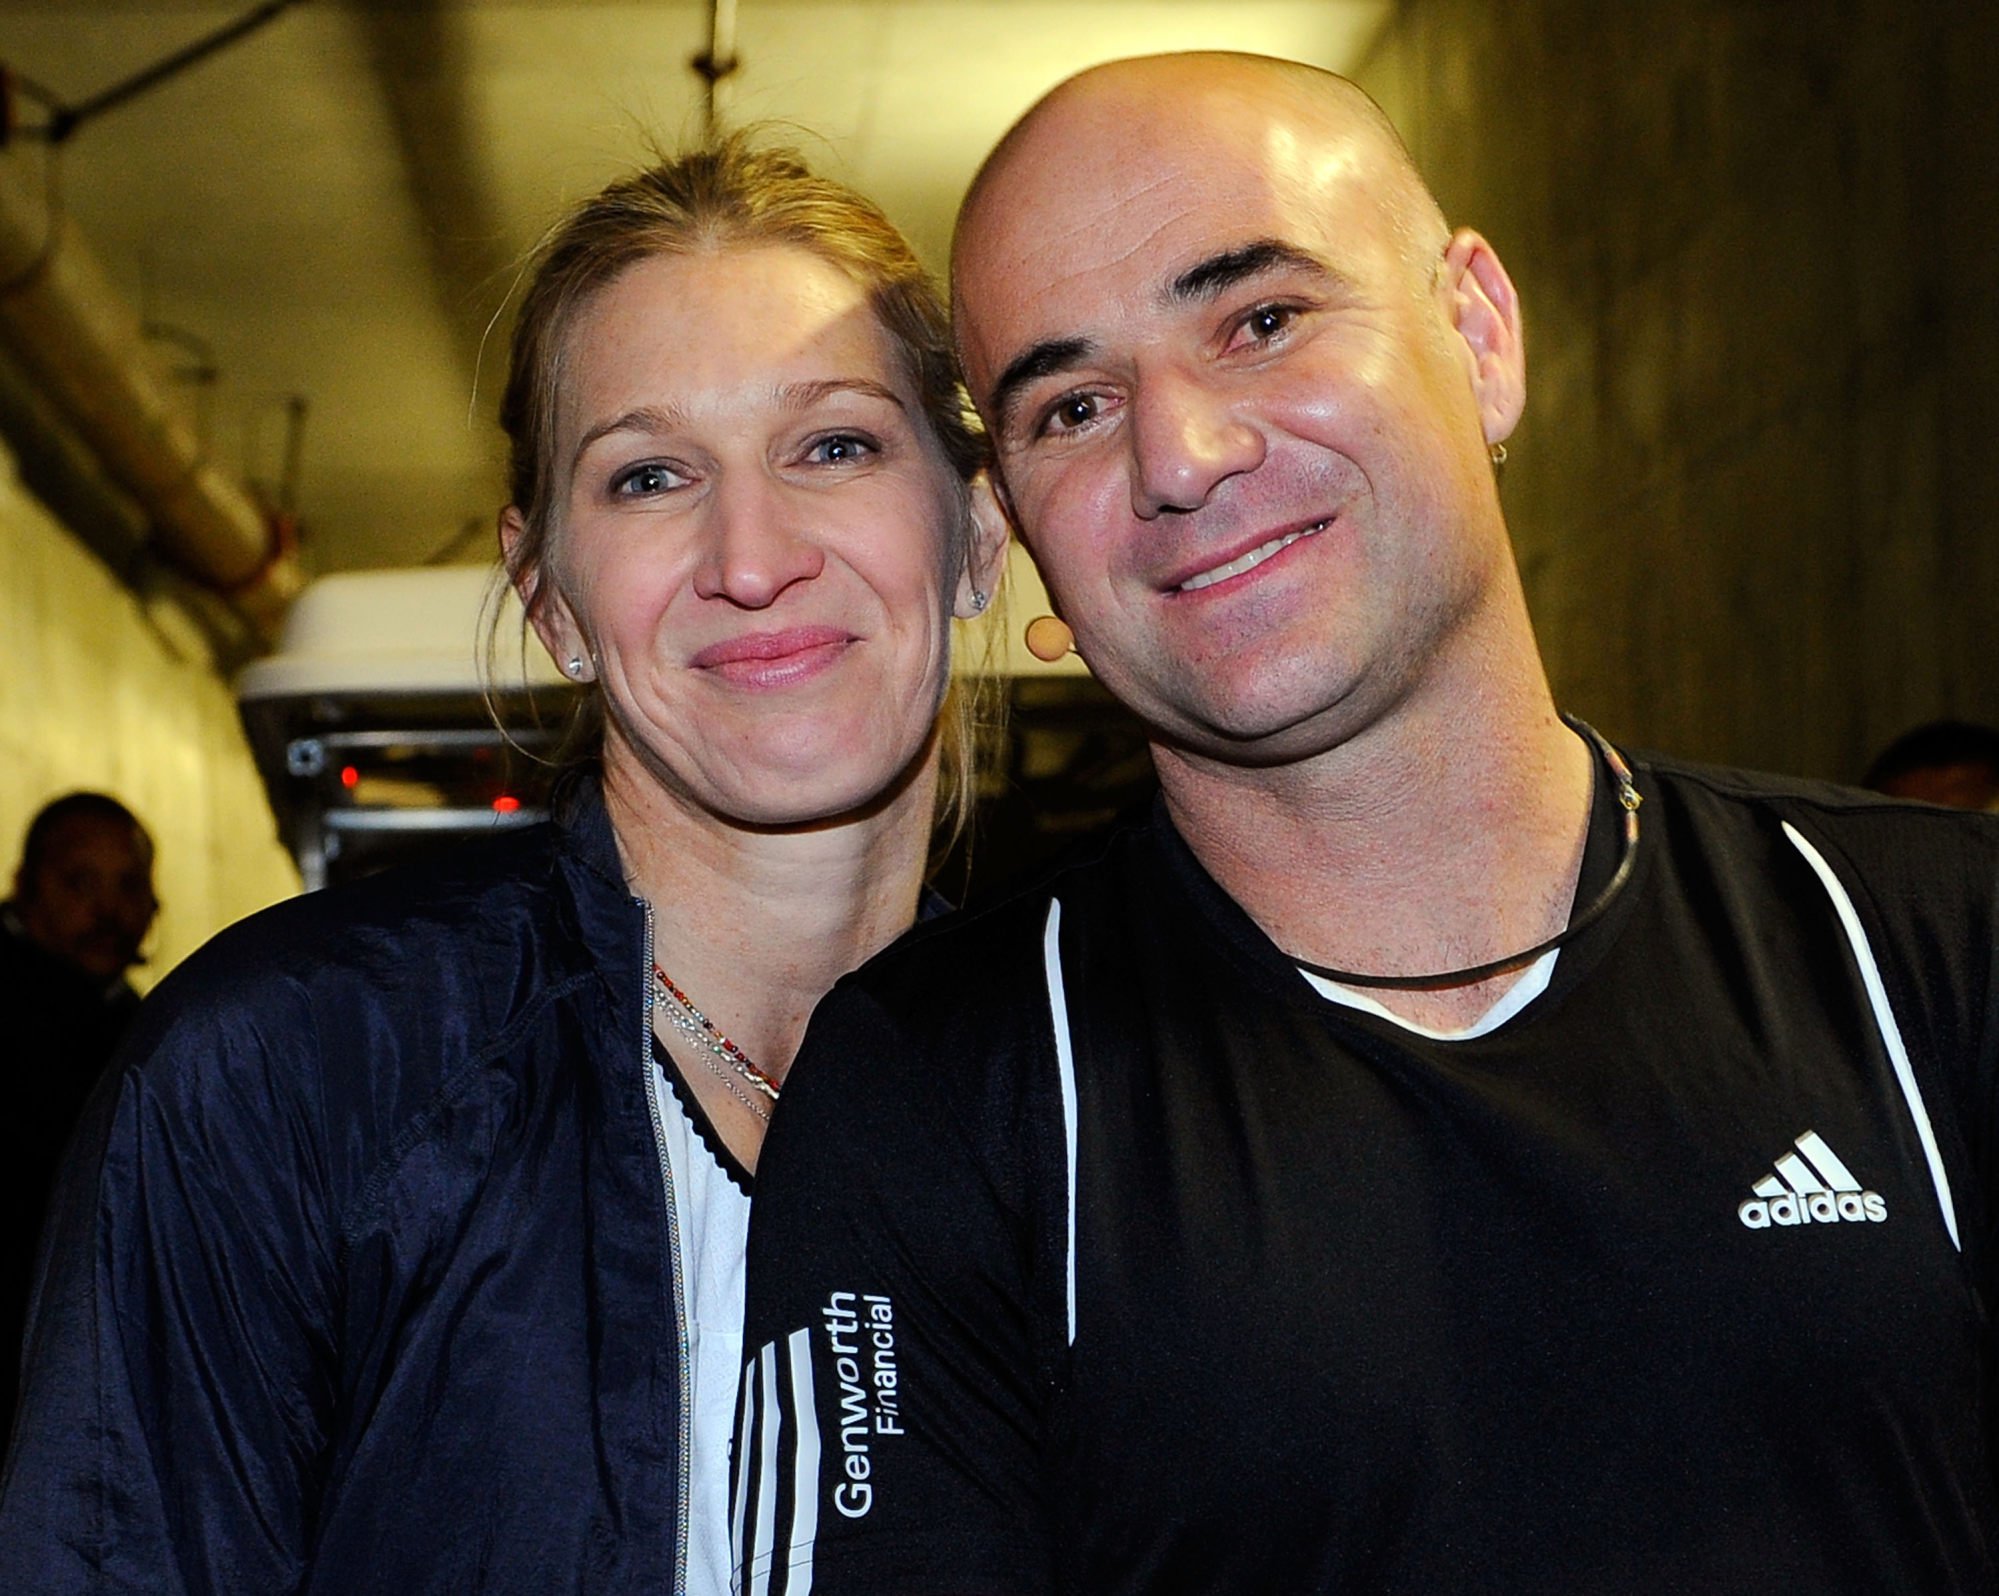 Former tennis star Andre Agassi of the US with his wife and fellow tennis pro Steffi Graf of Germany. Photo: Getty Images/AFP